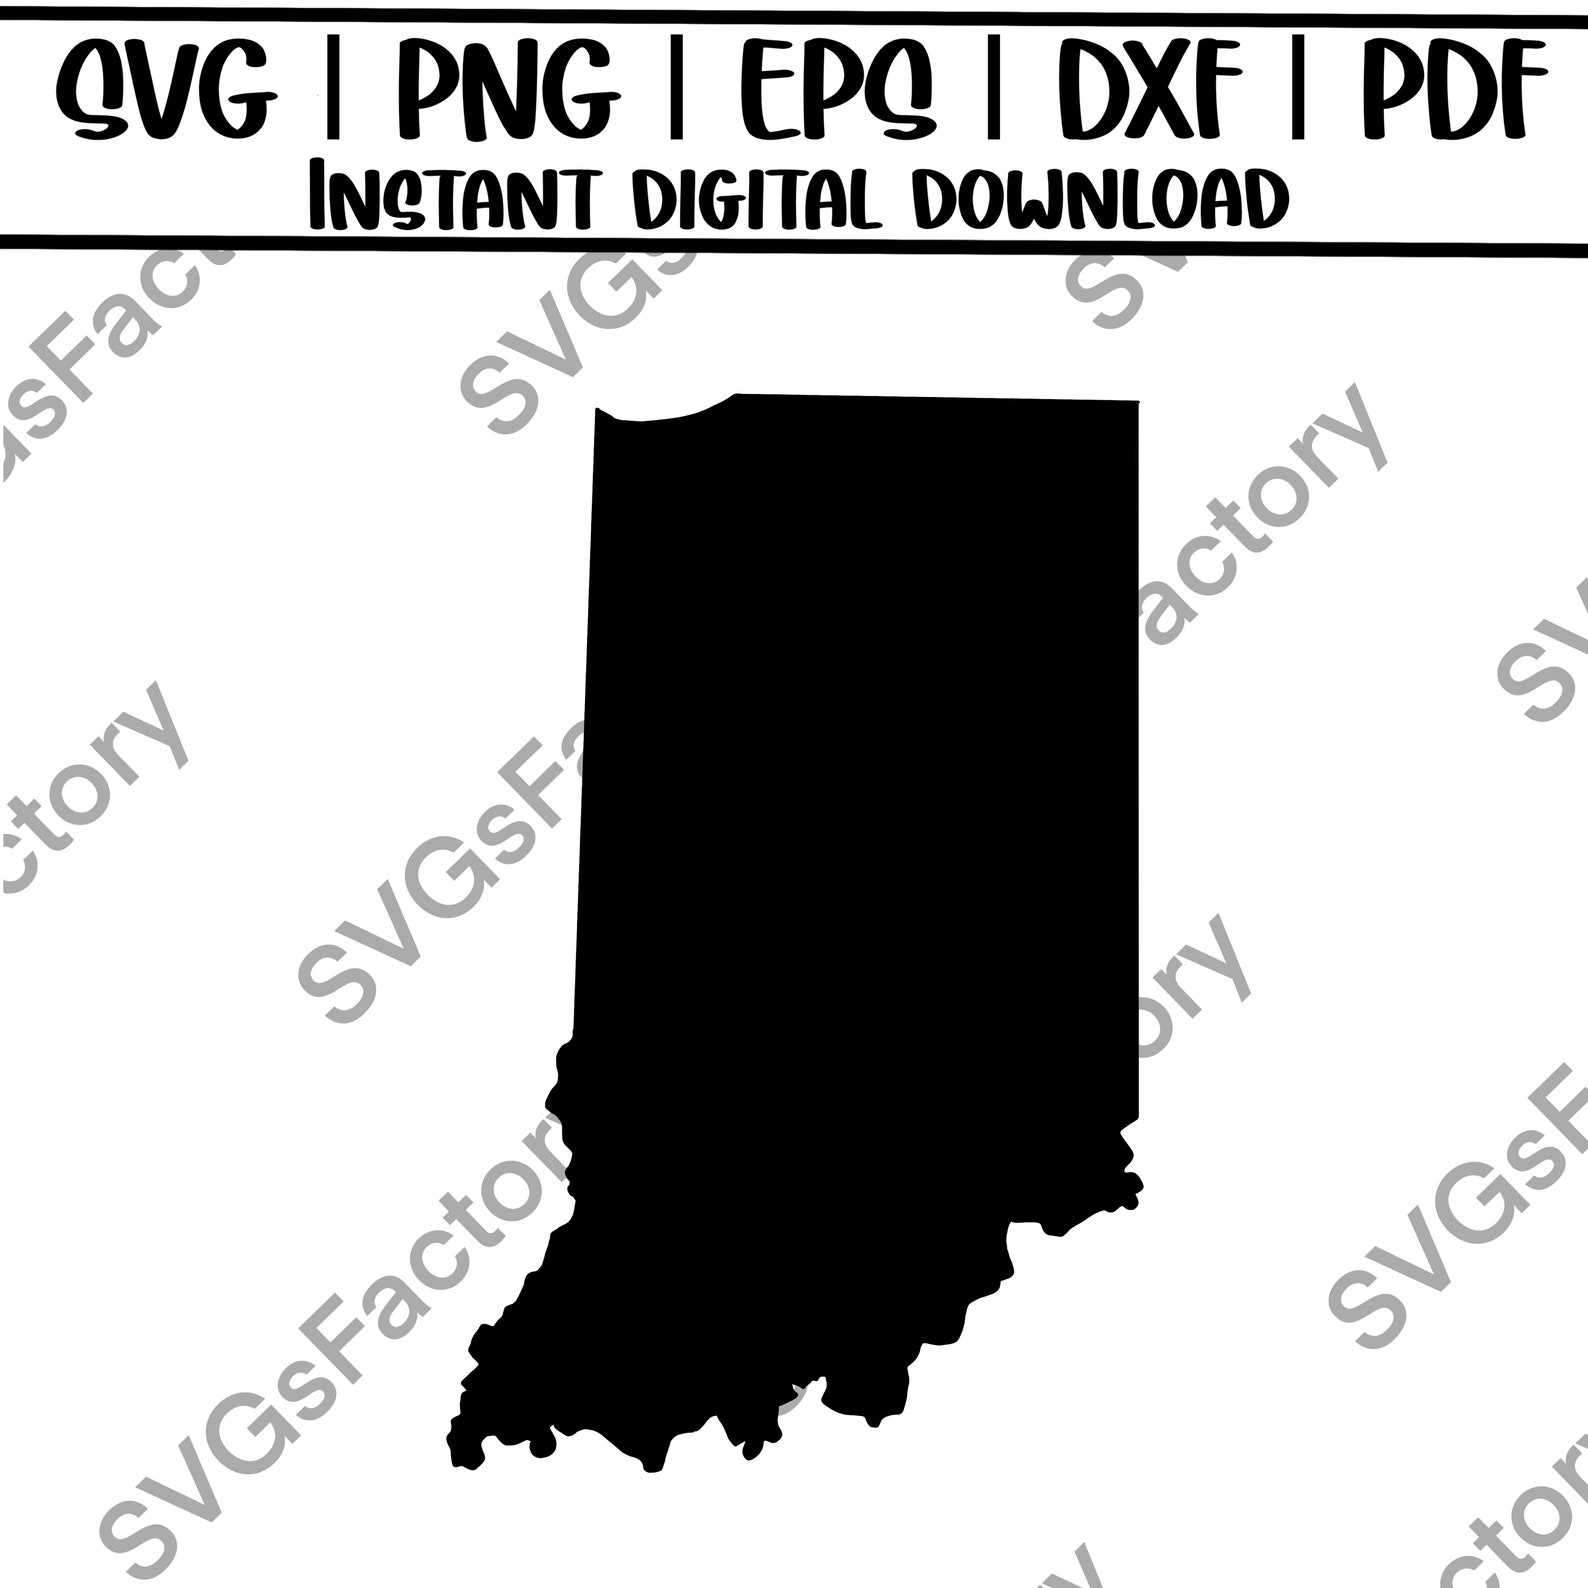 Download Indiana State SVG and PNG Indiana Outline State Silhouette | Etsy